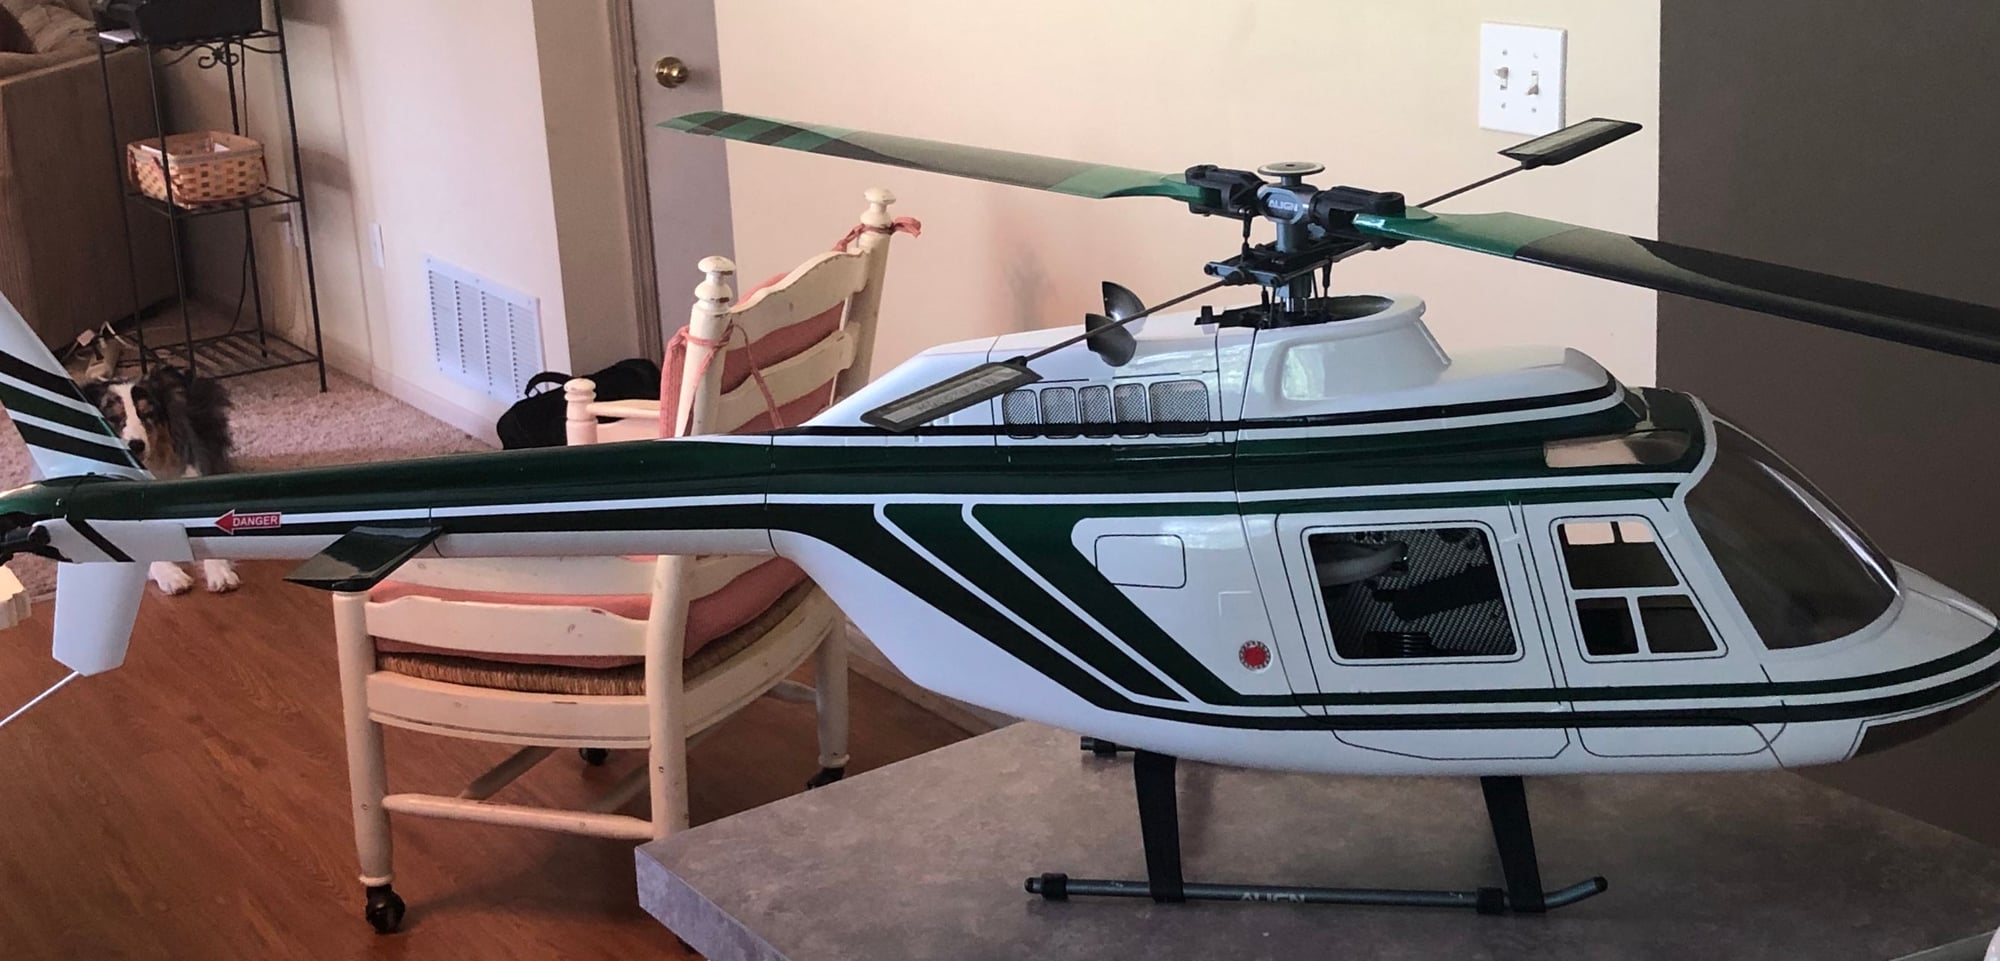 align 600 helicopter